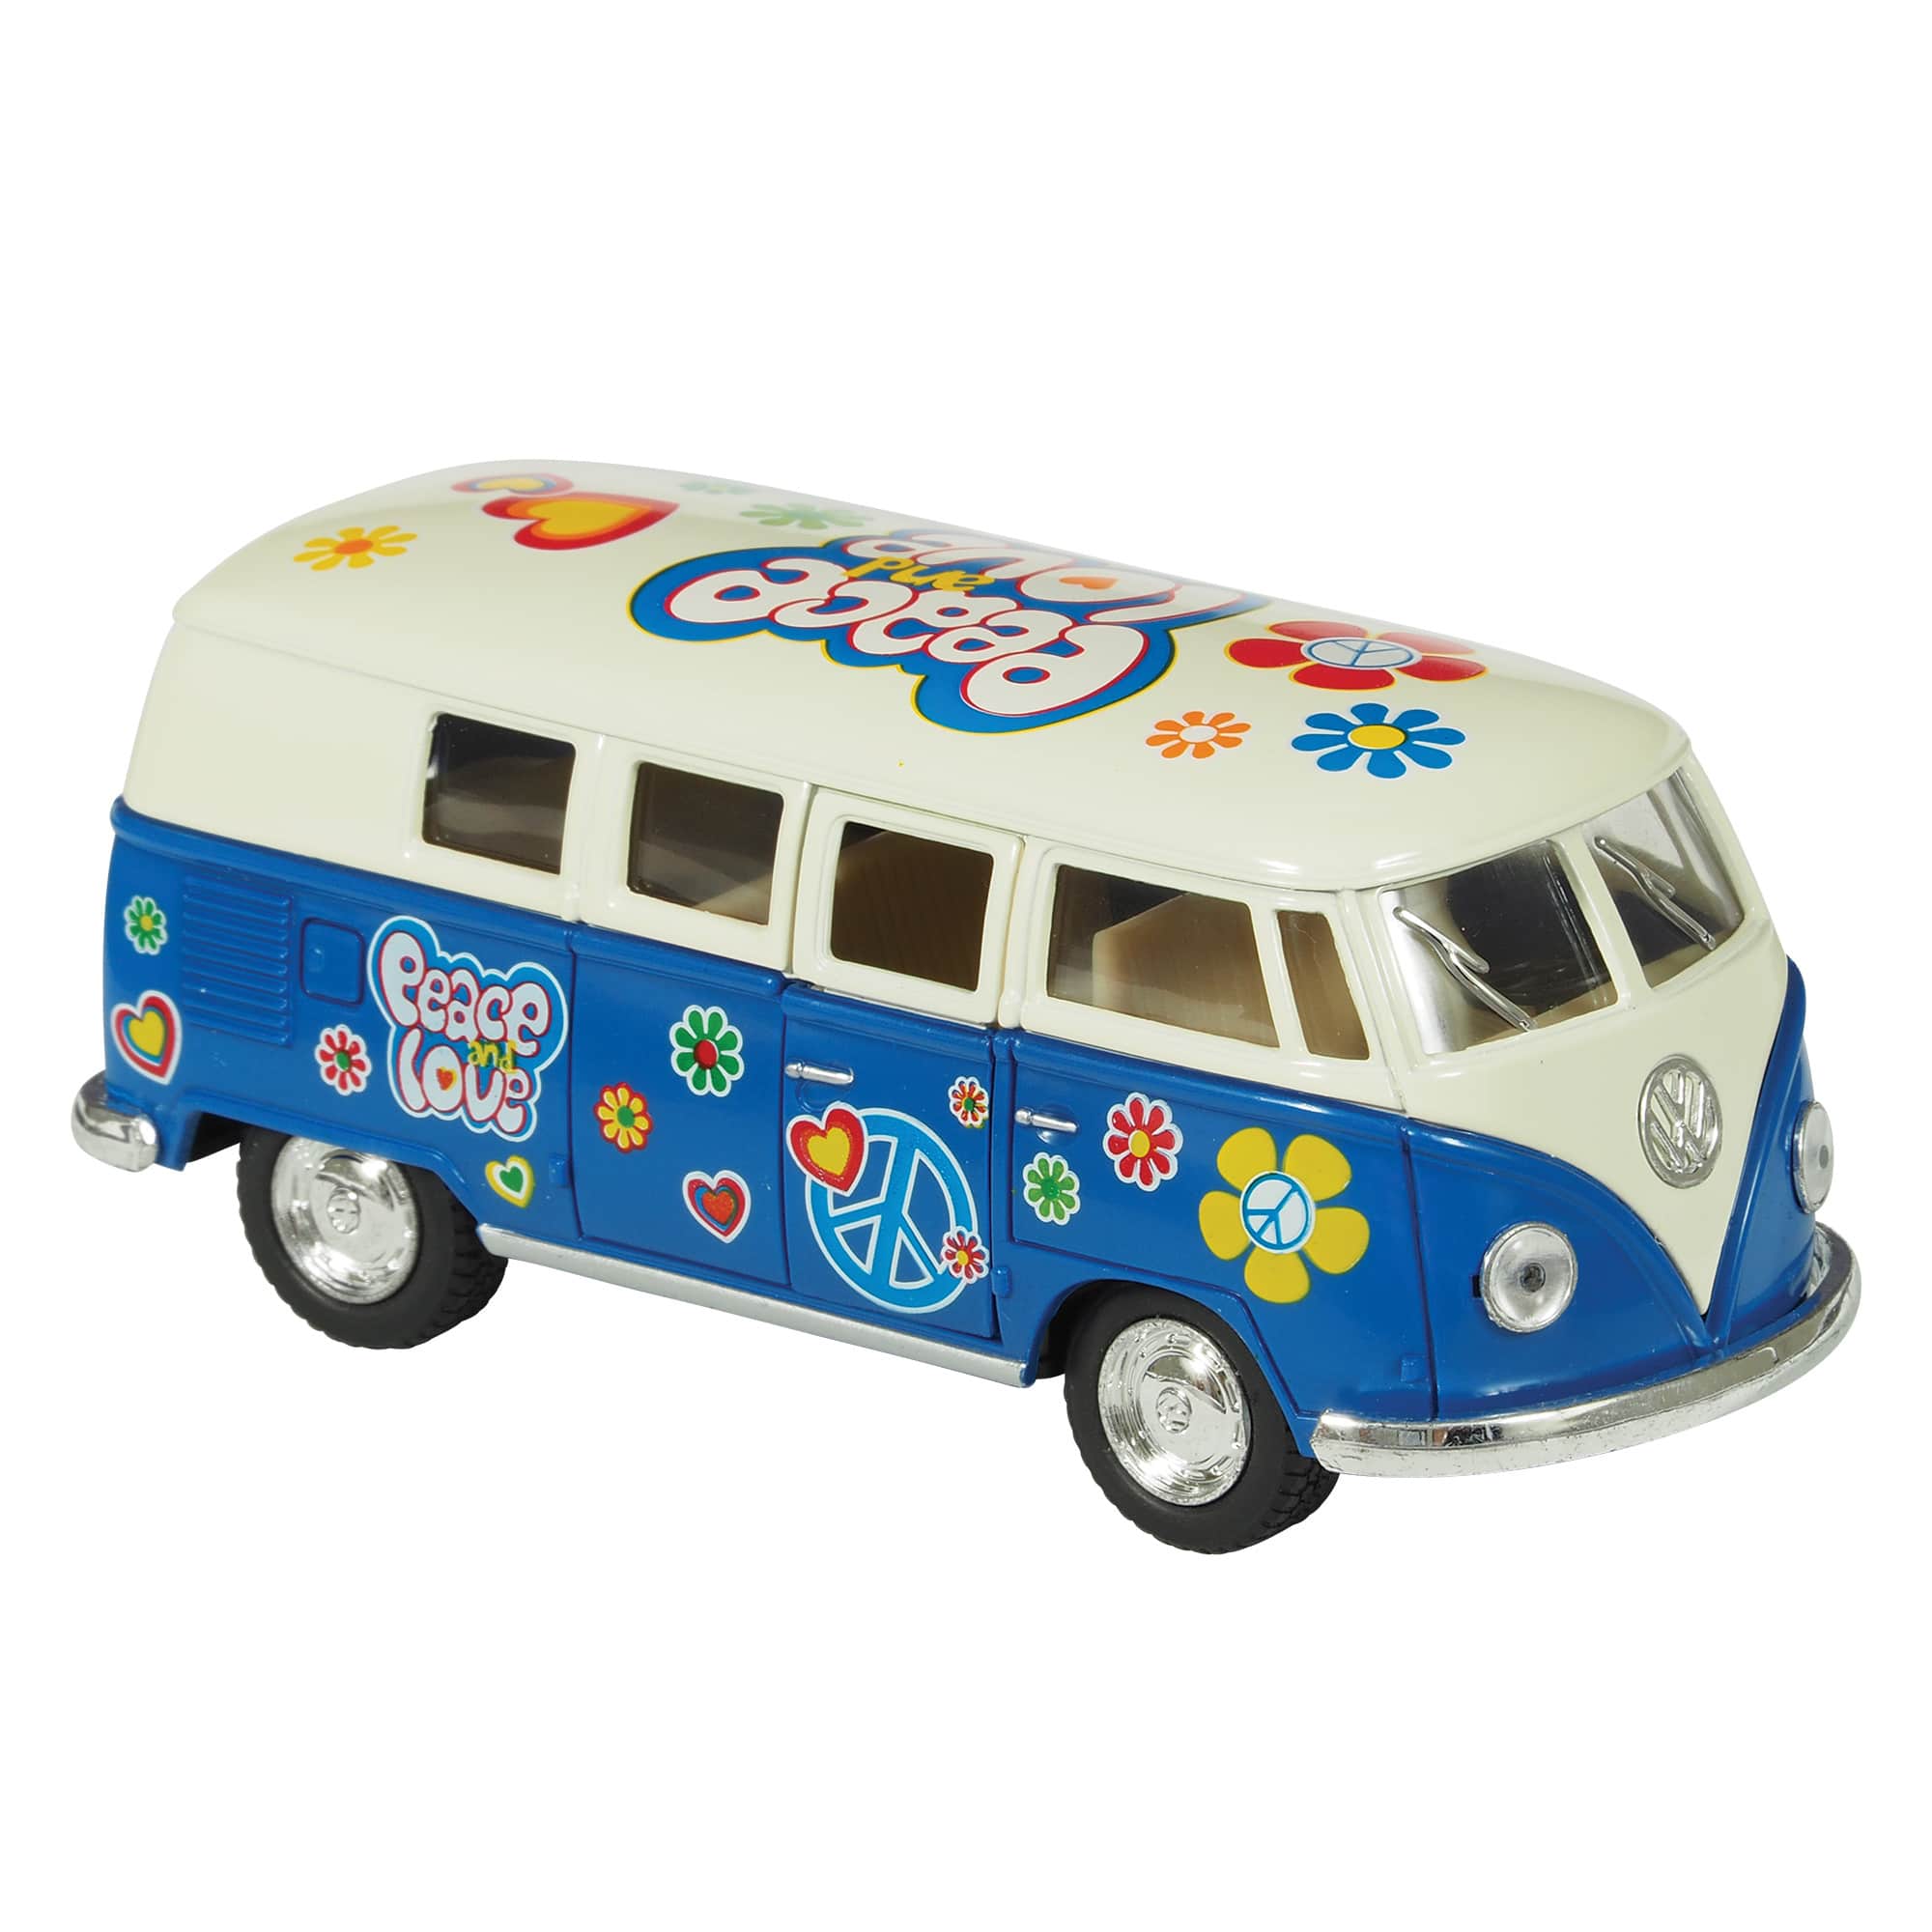 Diecast '62 VW Classic Peace & Love Bus (Single) Blue, Yellow, Orange or Red    